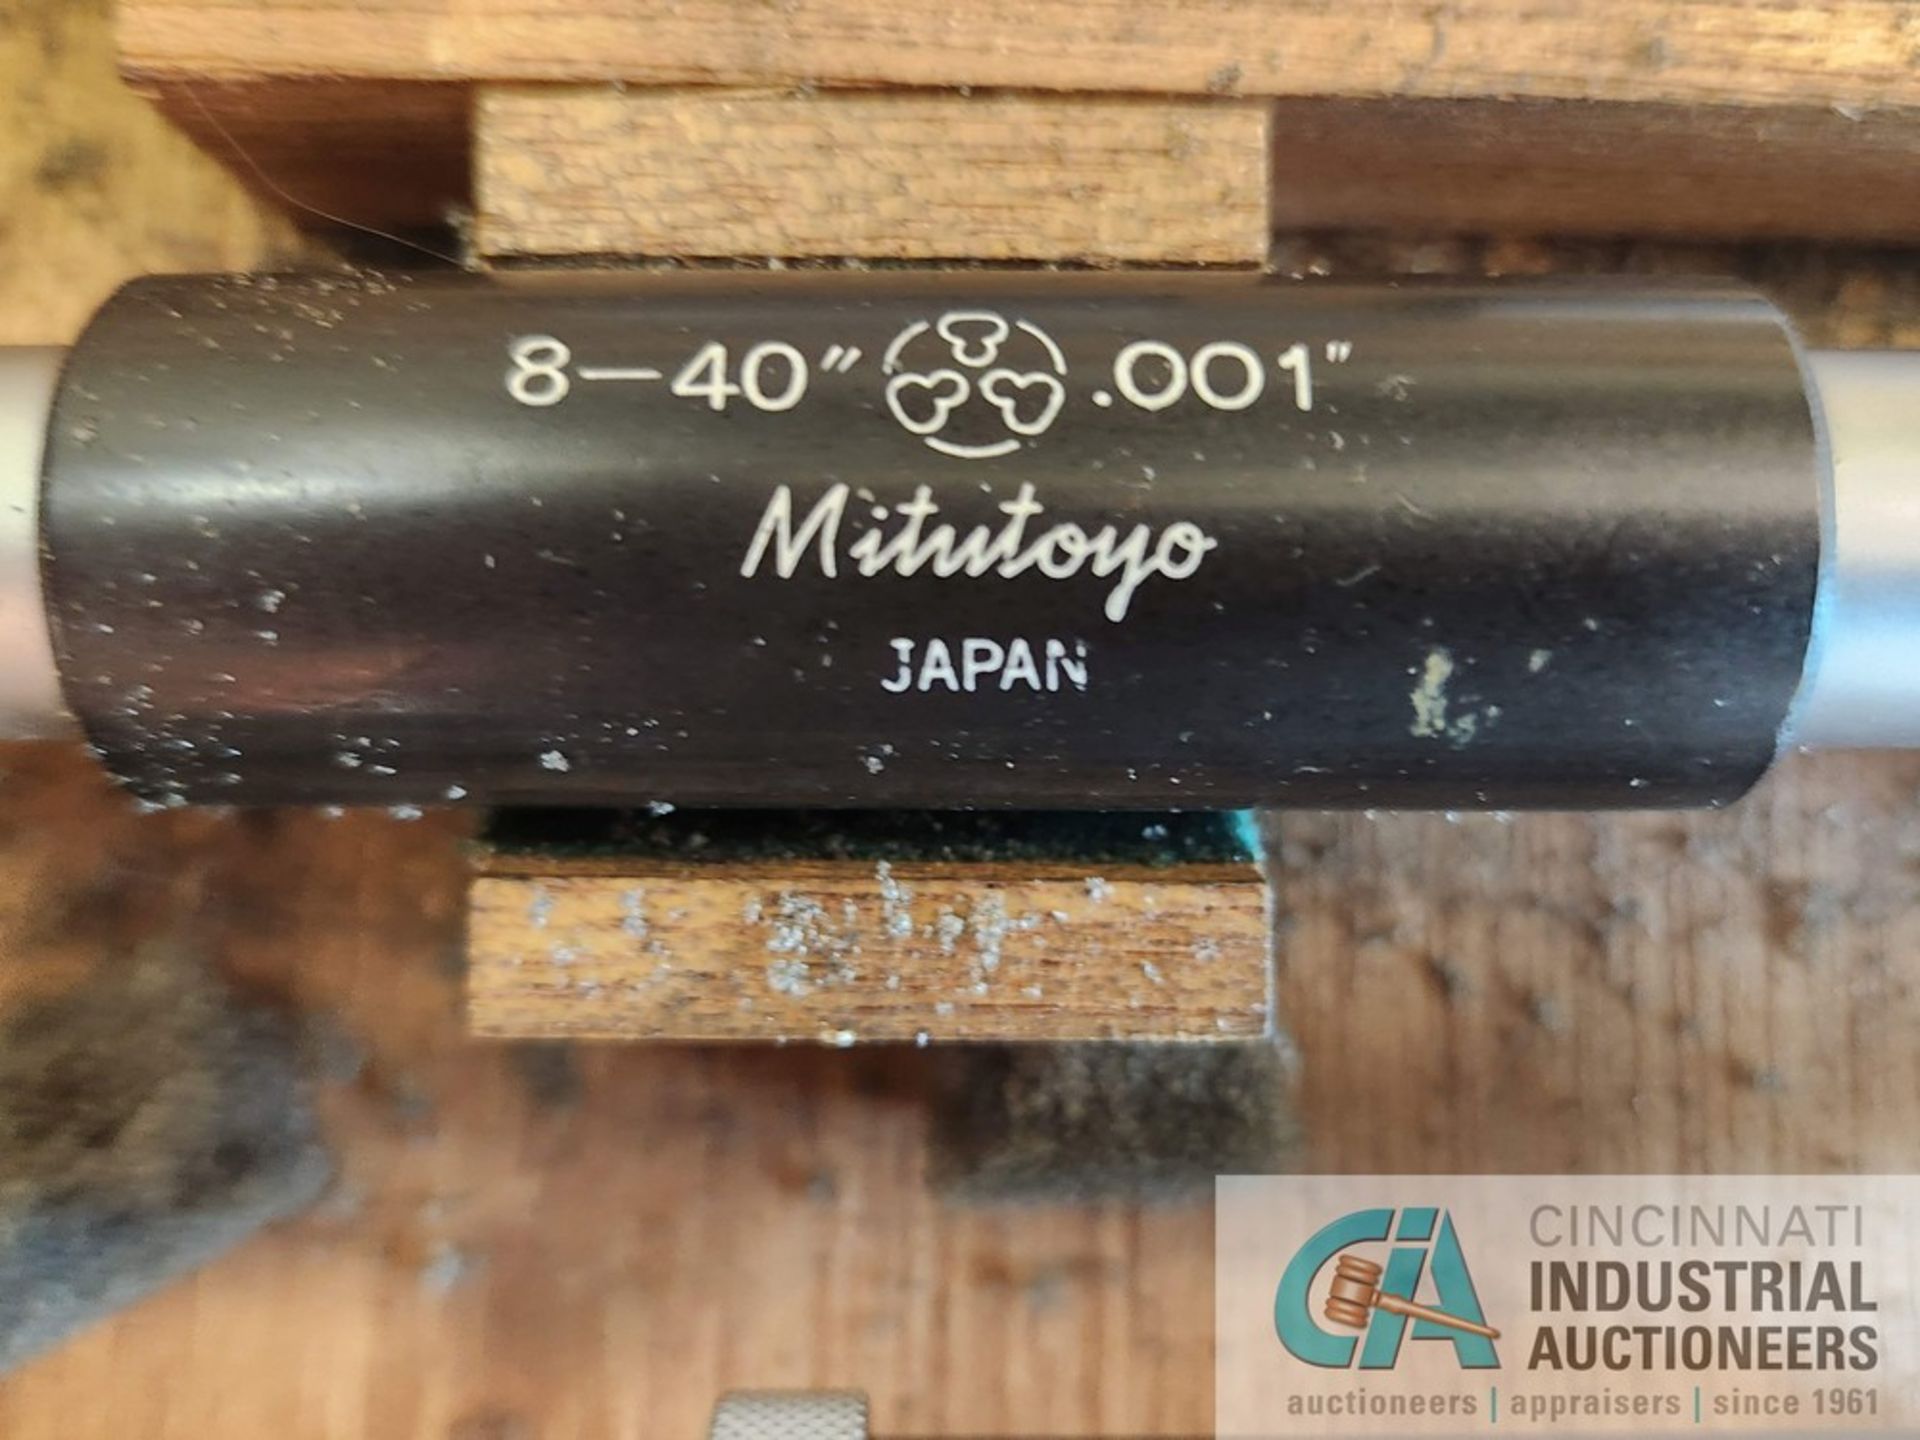 8" - 40" MITUTOYO I.D. MICROMETER - Image 4 of 5